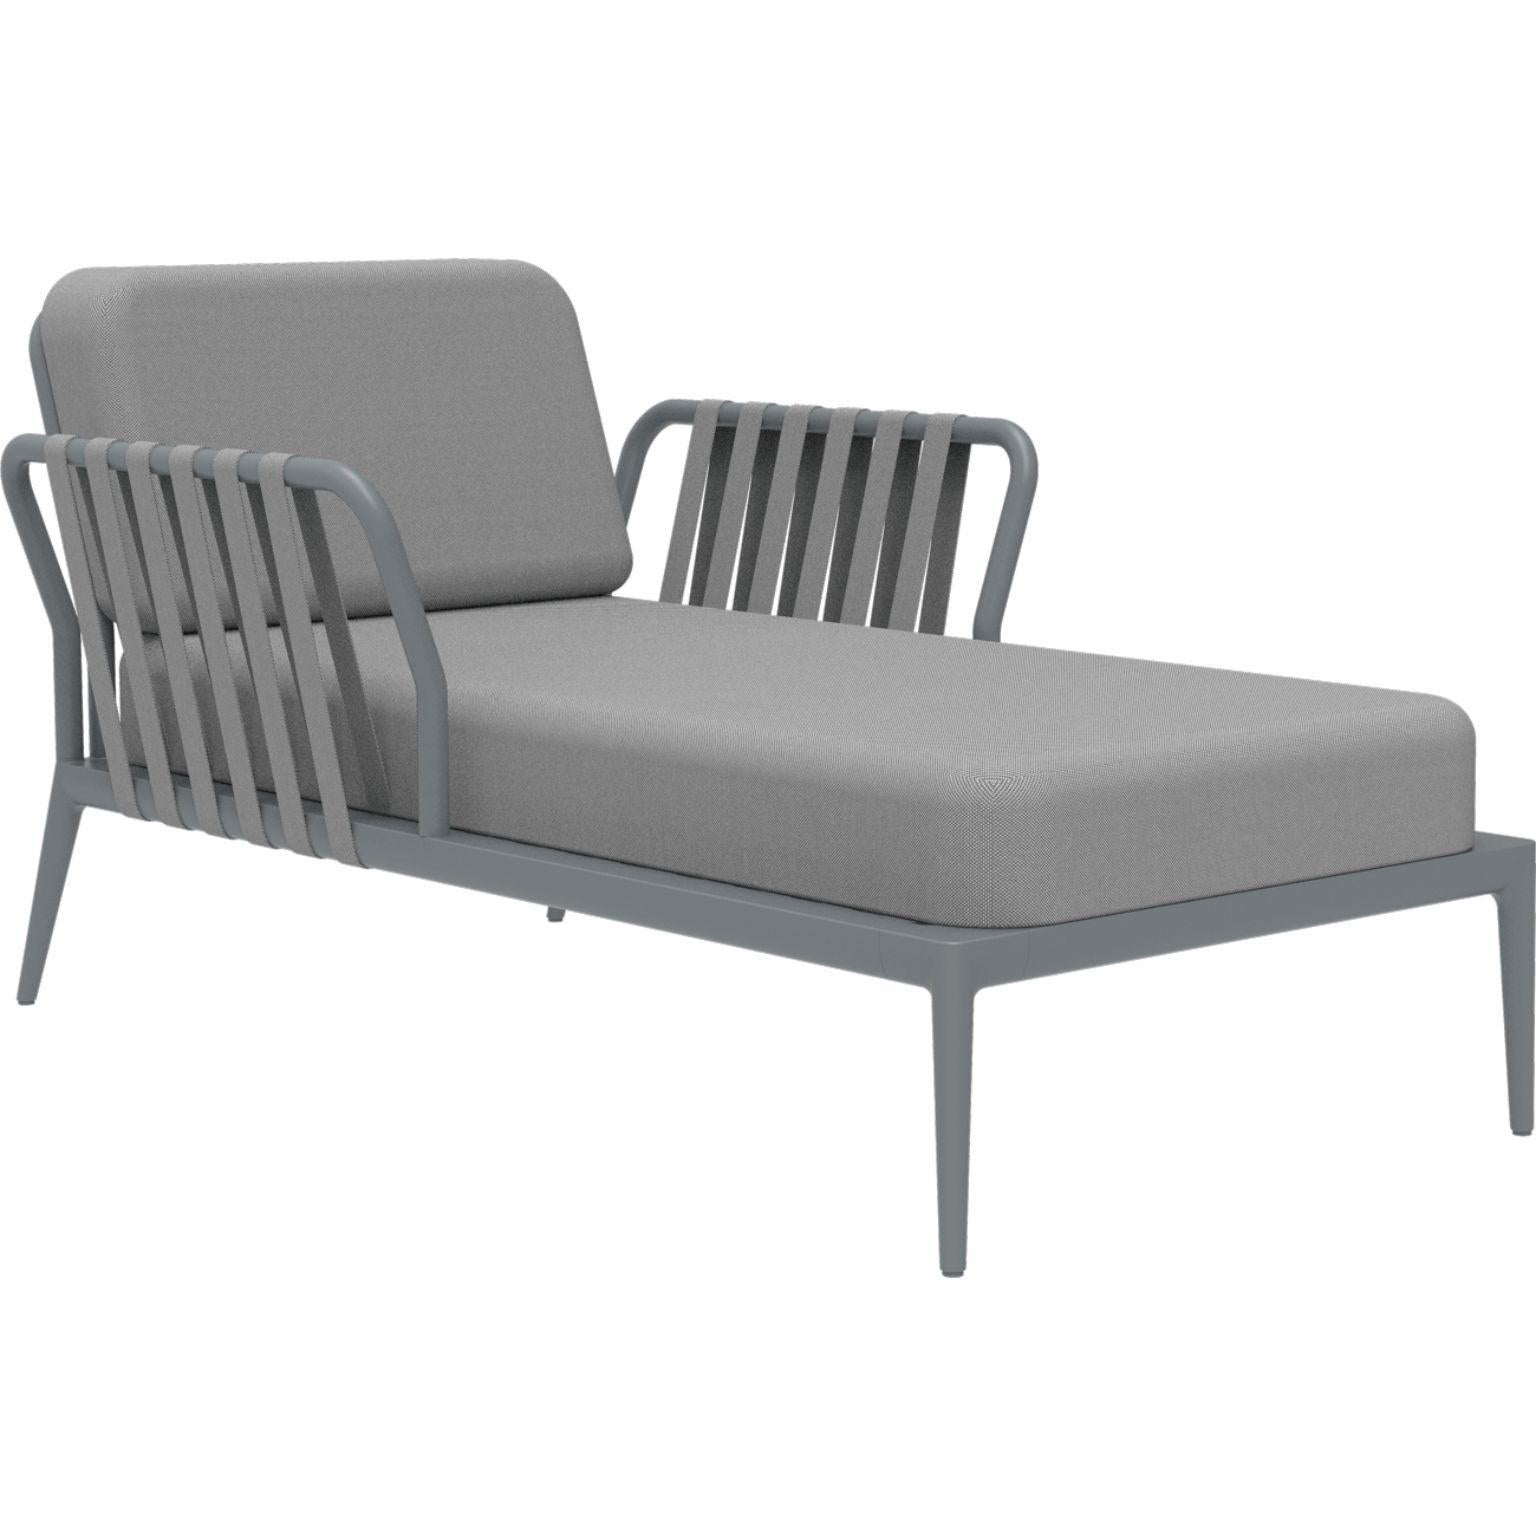 Ribbons Grey Divan by MOWEE
Dimensions: D91 x W155 x H81 cm (seat height 42cm)
Material: Aluminum and upholstery.
Weight: 30 kg.
Also available in different colors and finishes. 

An unmistakable collection for its beauty and robustness. A